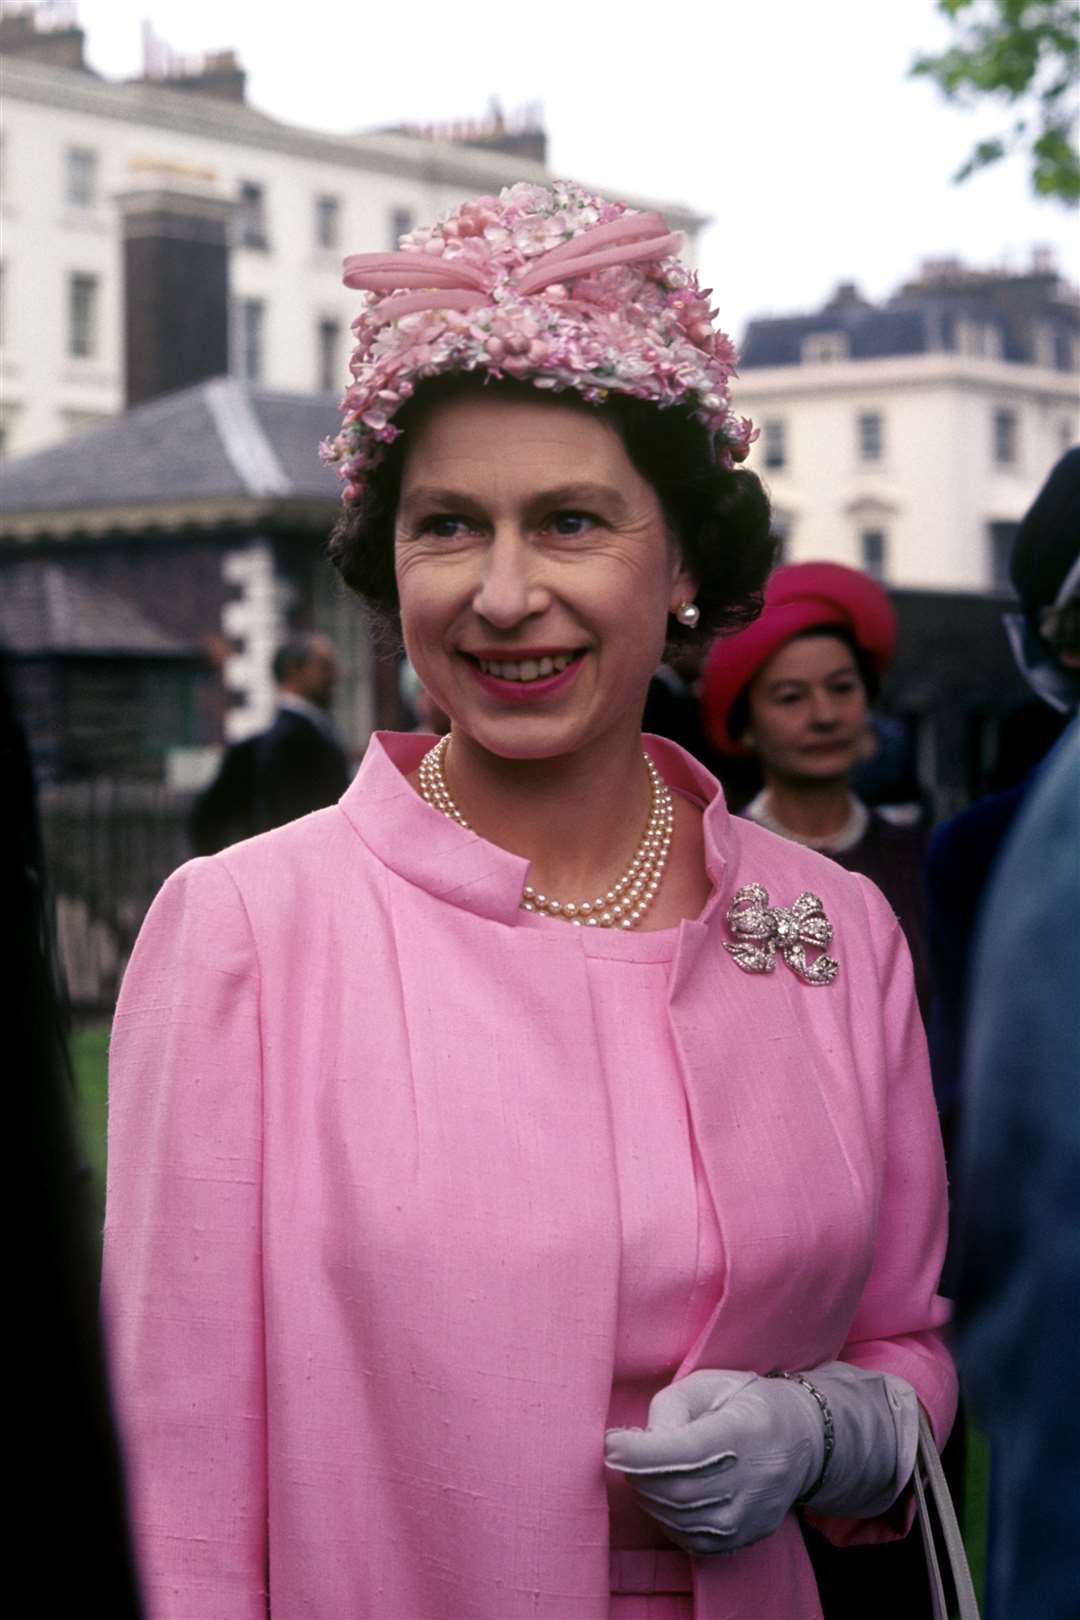 The monarch at a garden party in the grounds of the Royal Hospital, Chelsea, in 1967 (PA)